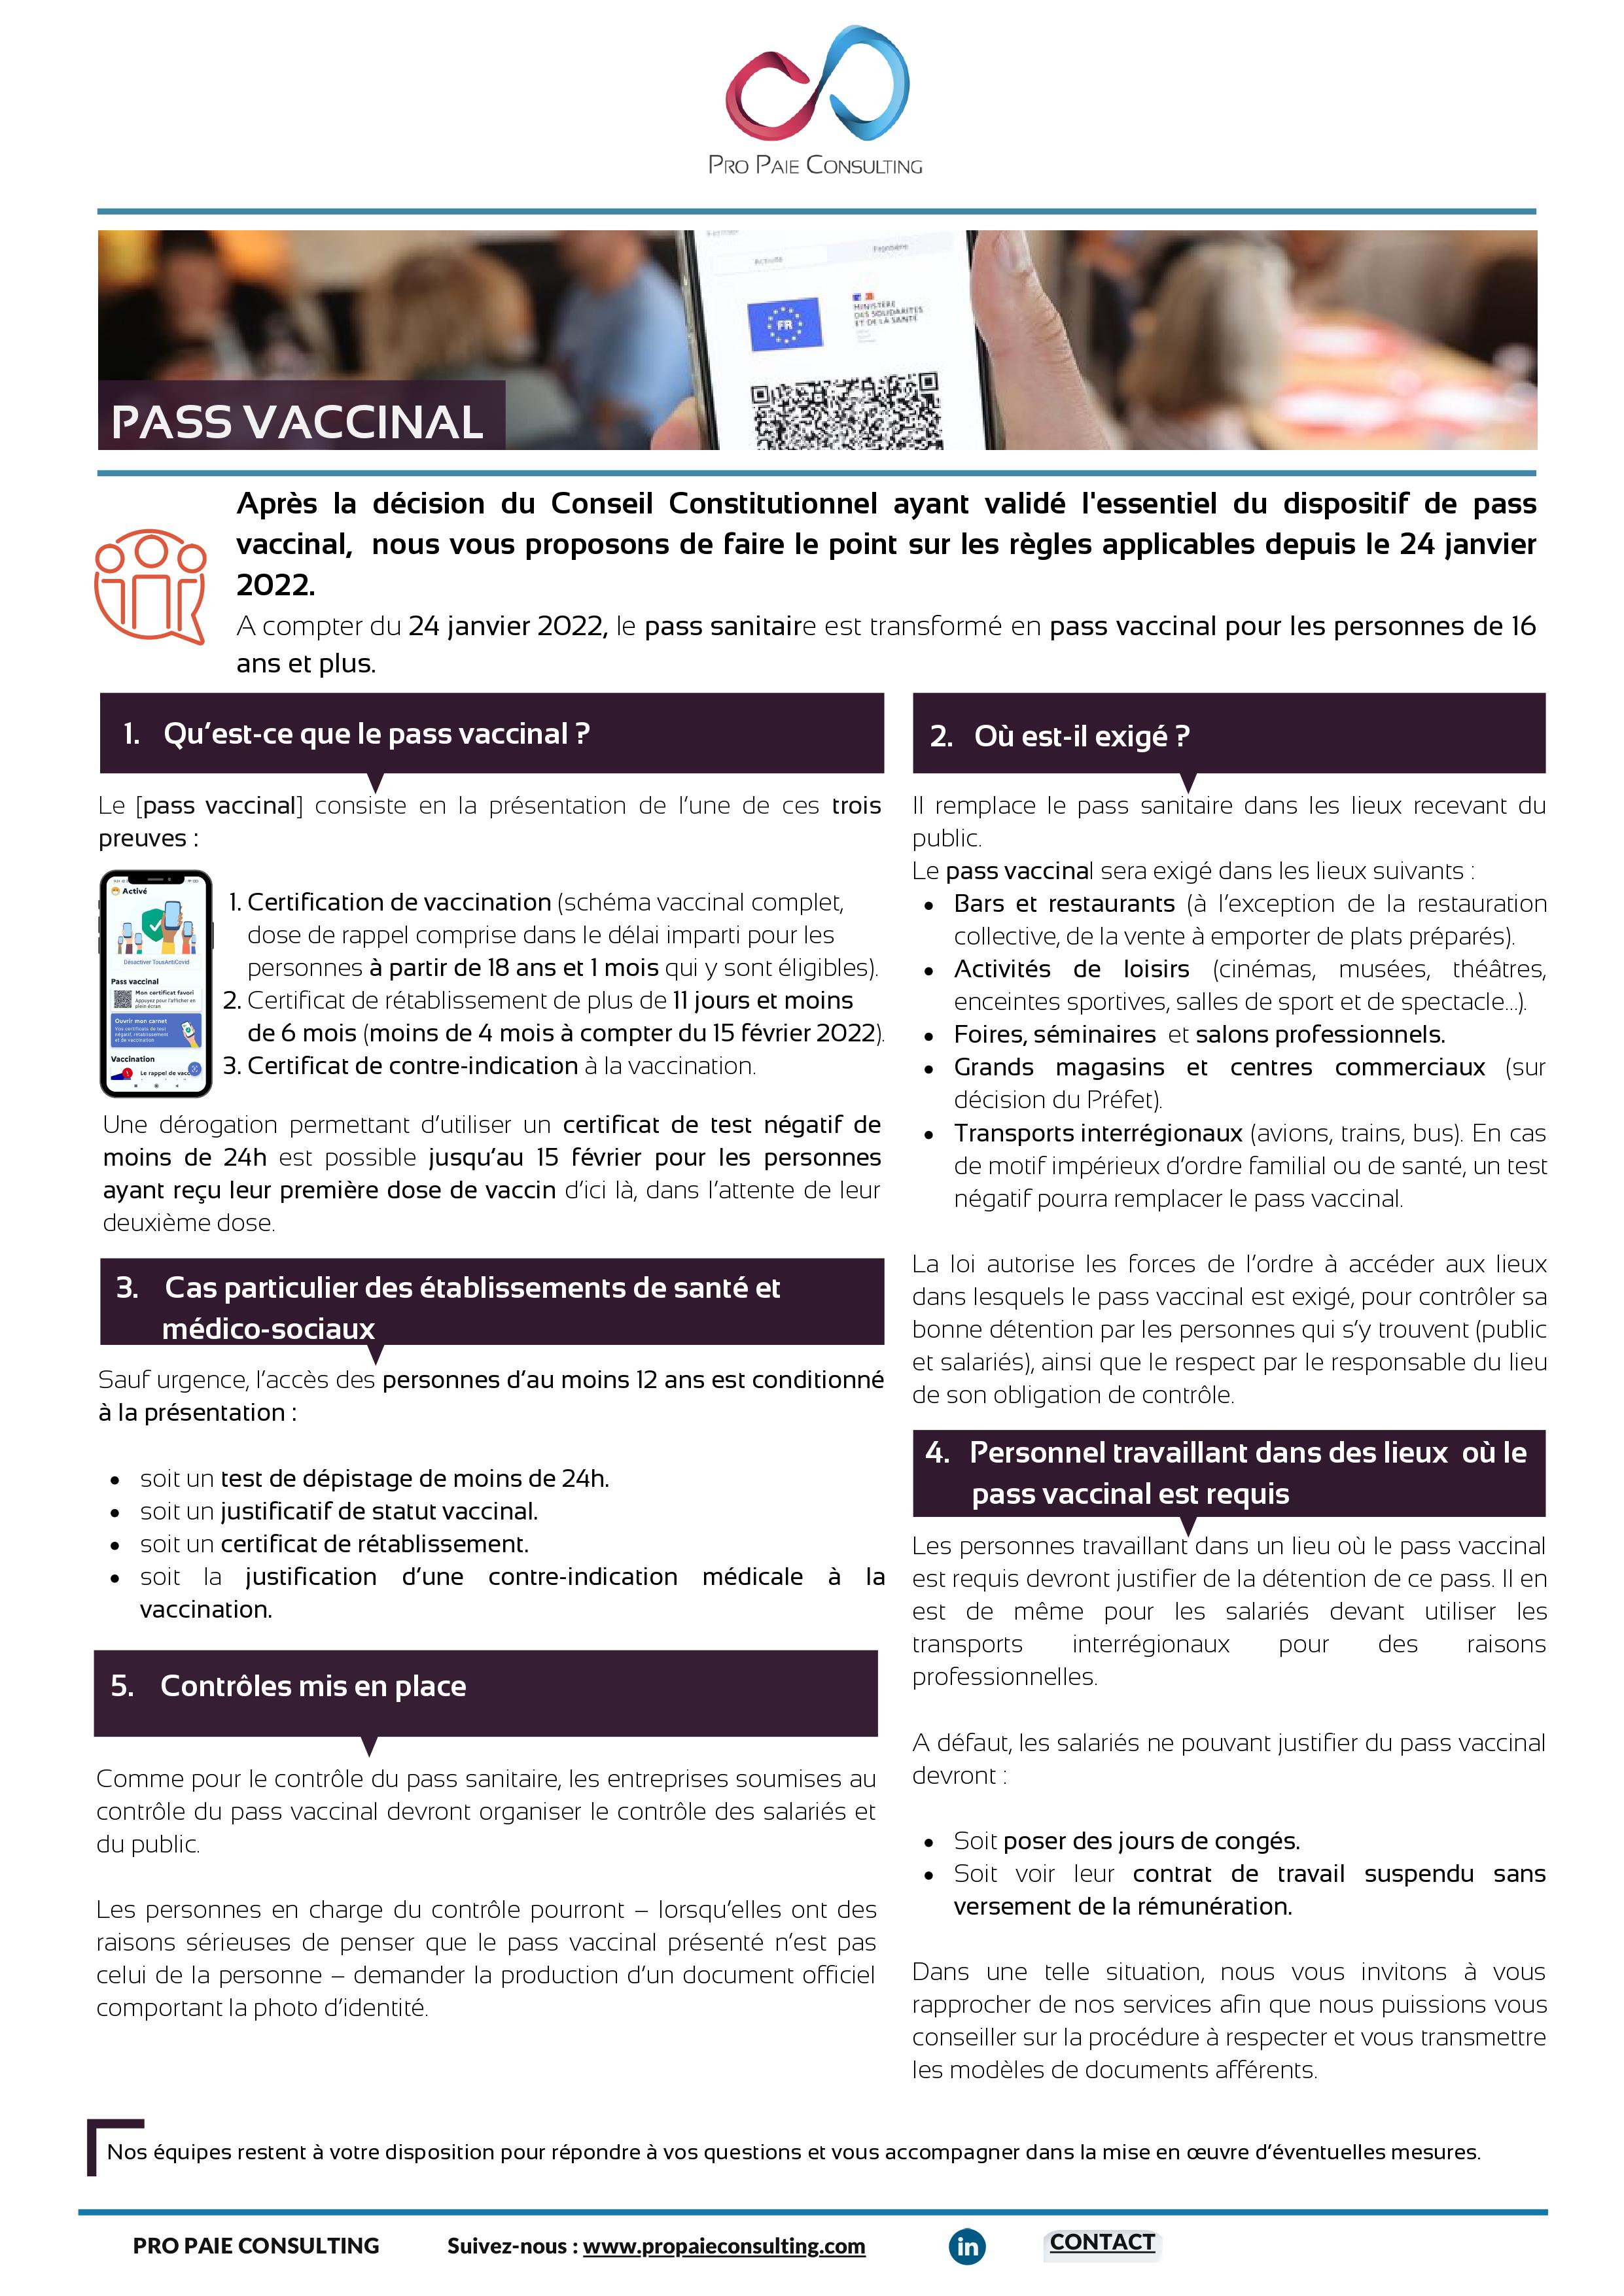 pass vaccinal pro paie consulting